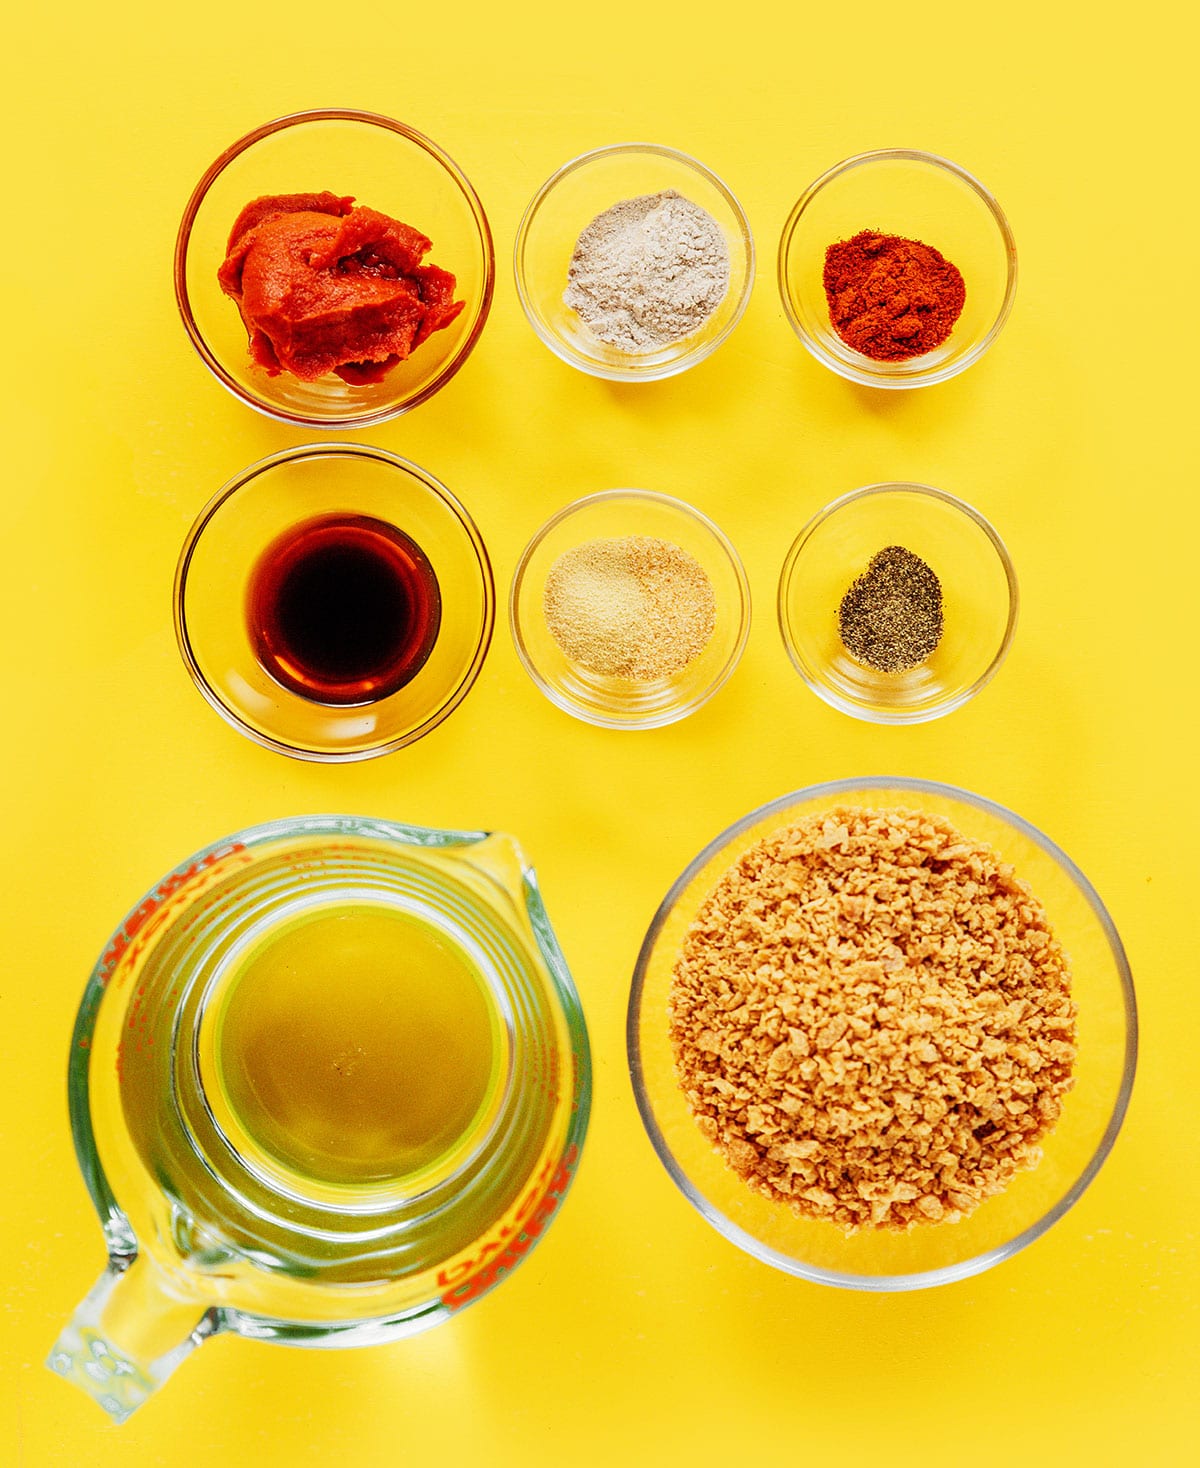 Ingredients to make vegan ground beef in small glass bowls on a yellow surface,